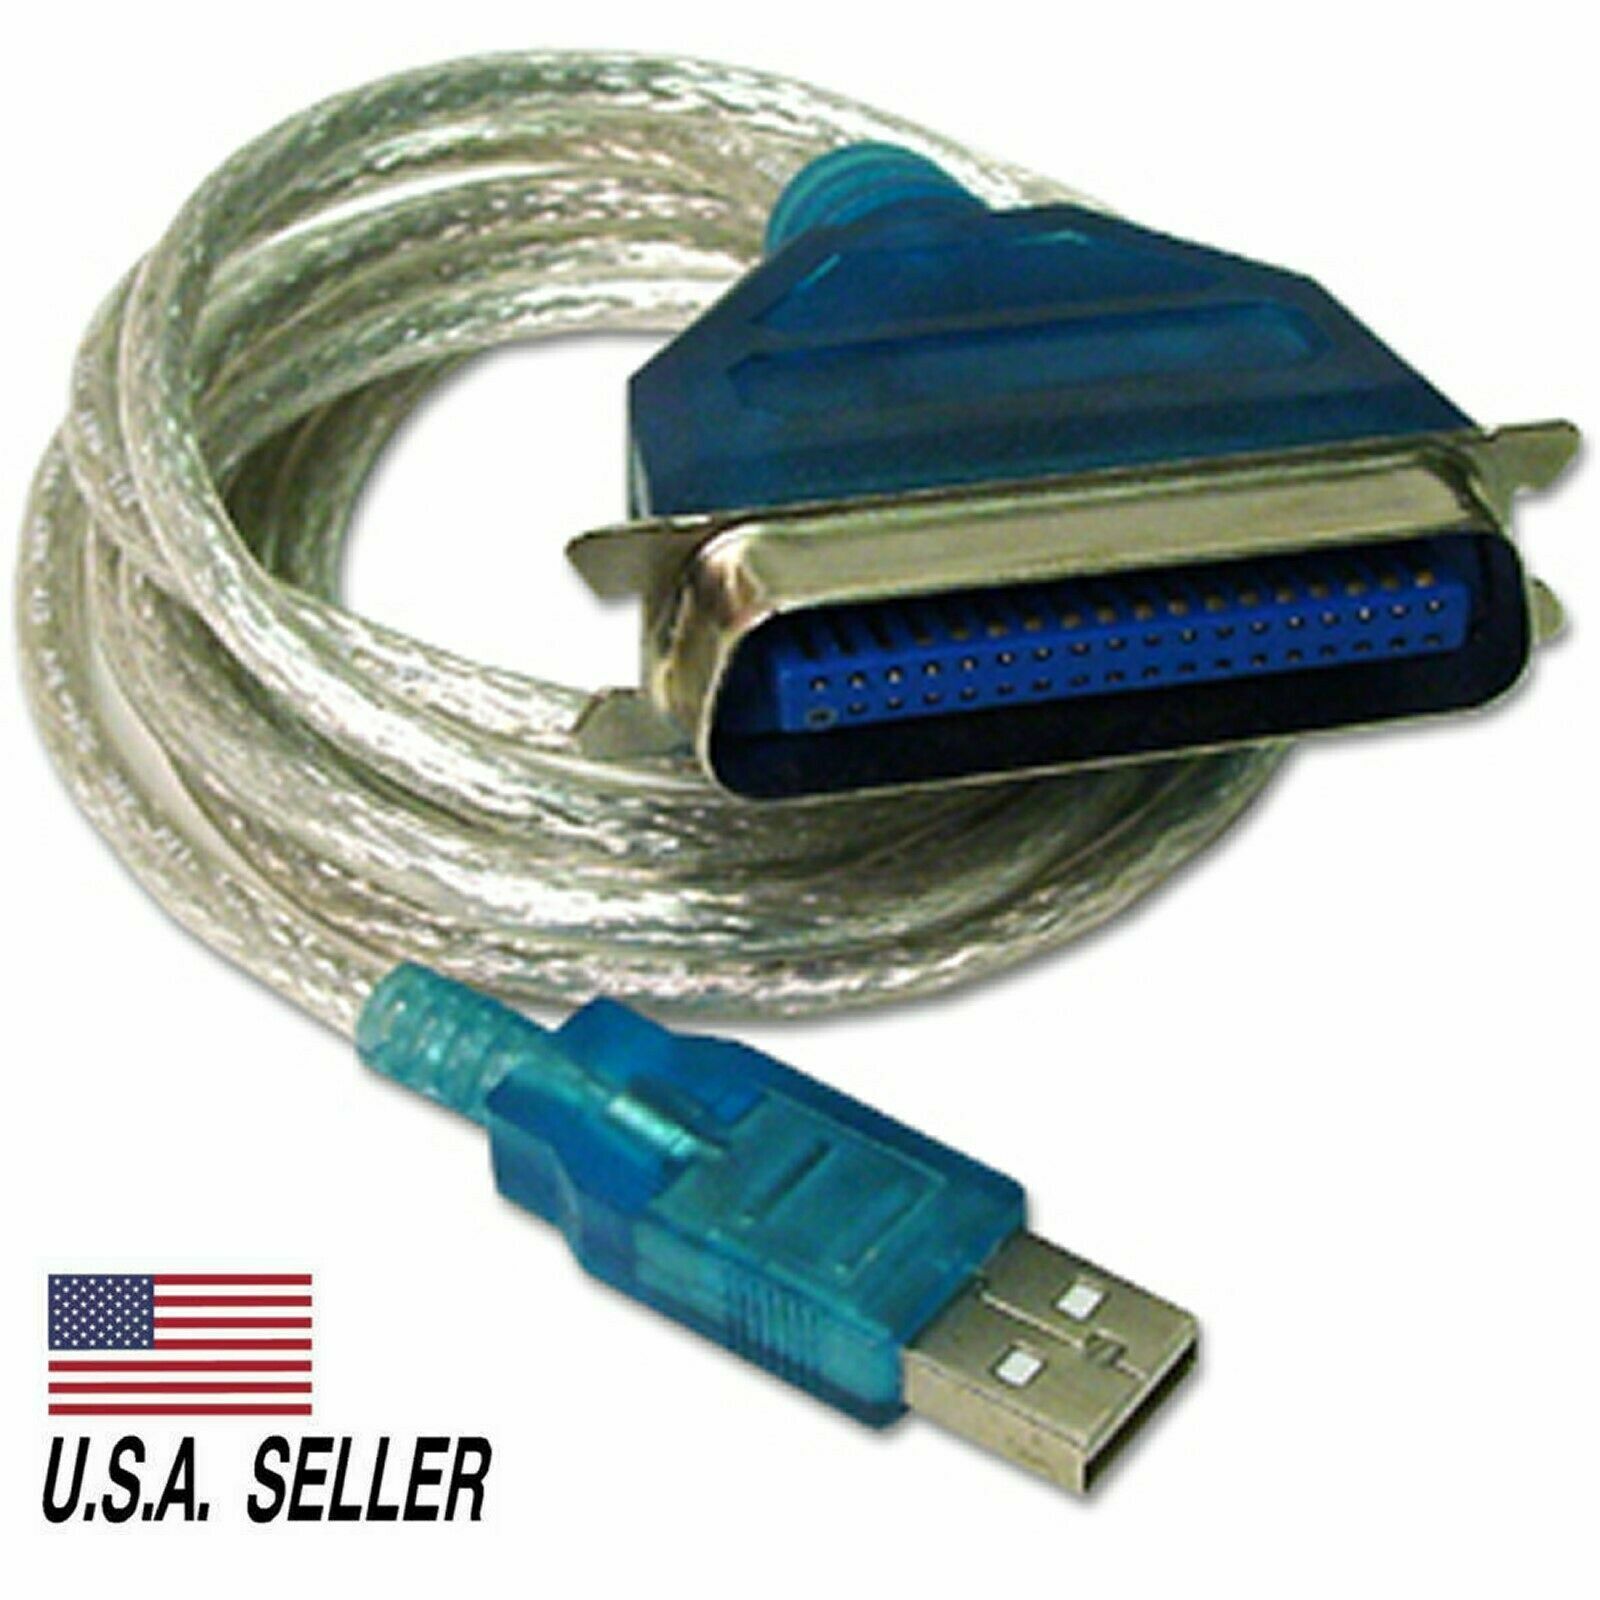 USB to PRINTER IEEE 1284 Centronic Parallel Port 36-pin Cable Adapter -US Seller